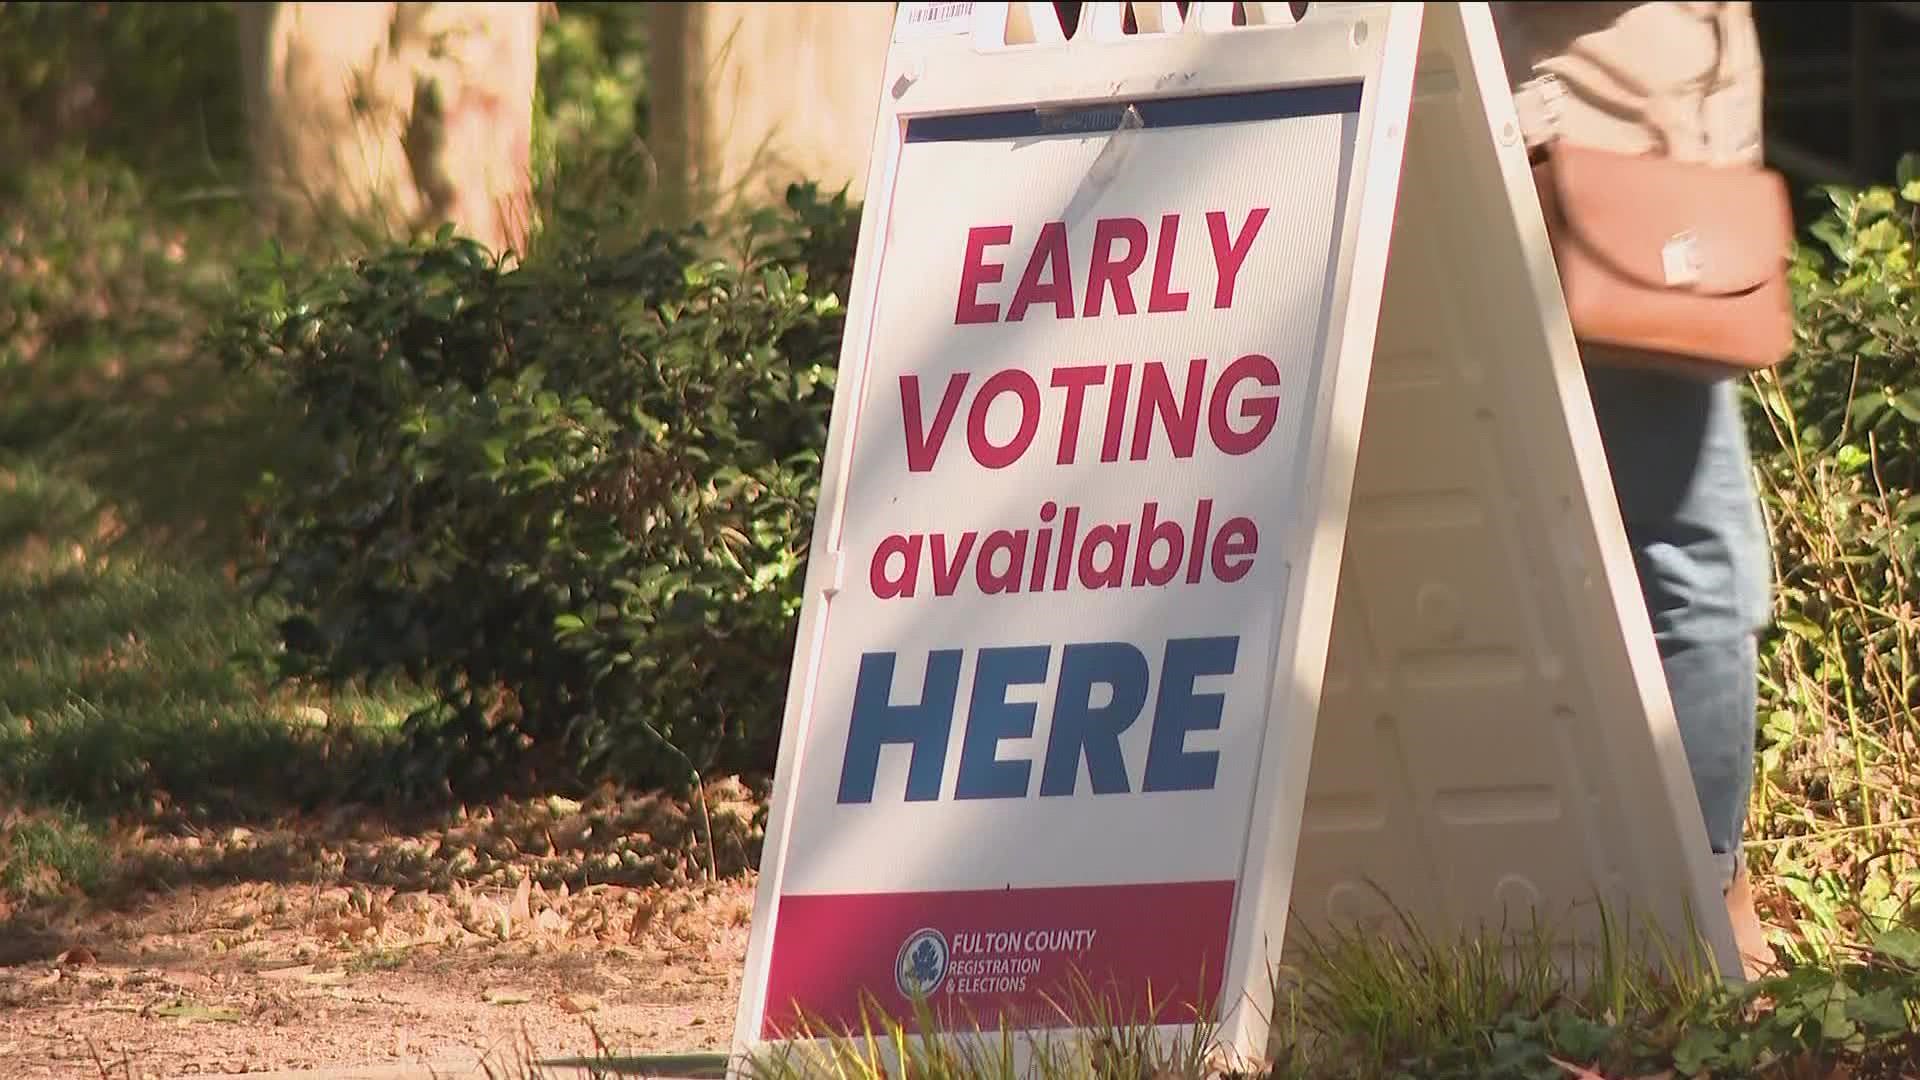 Georgia is already shattering the state record when it comes to early voting this election cycle.